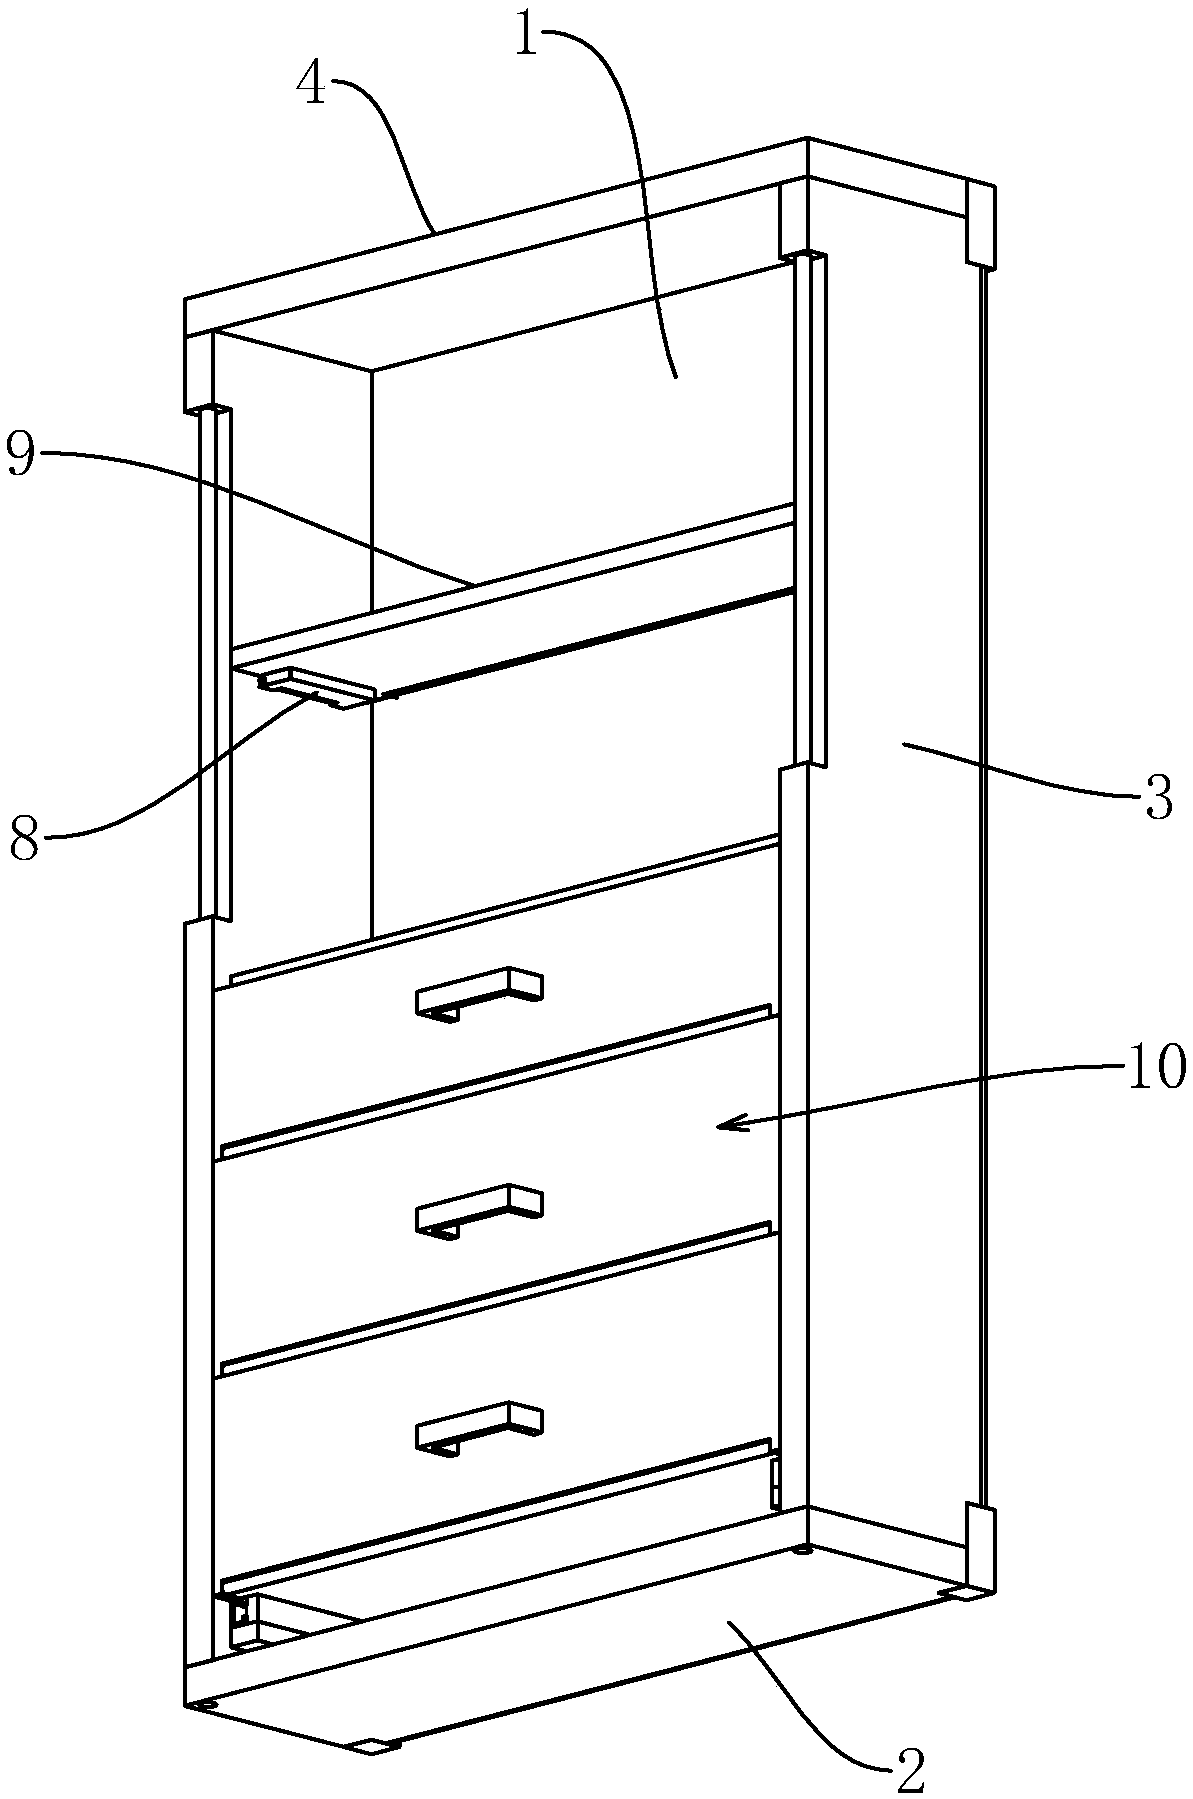 Foldable and detachable file cabinet